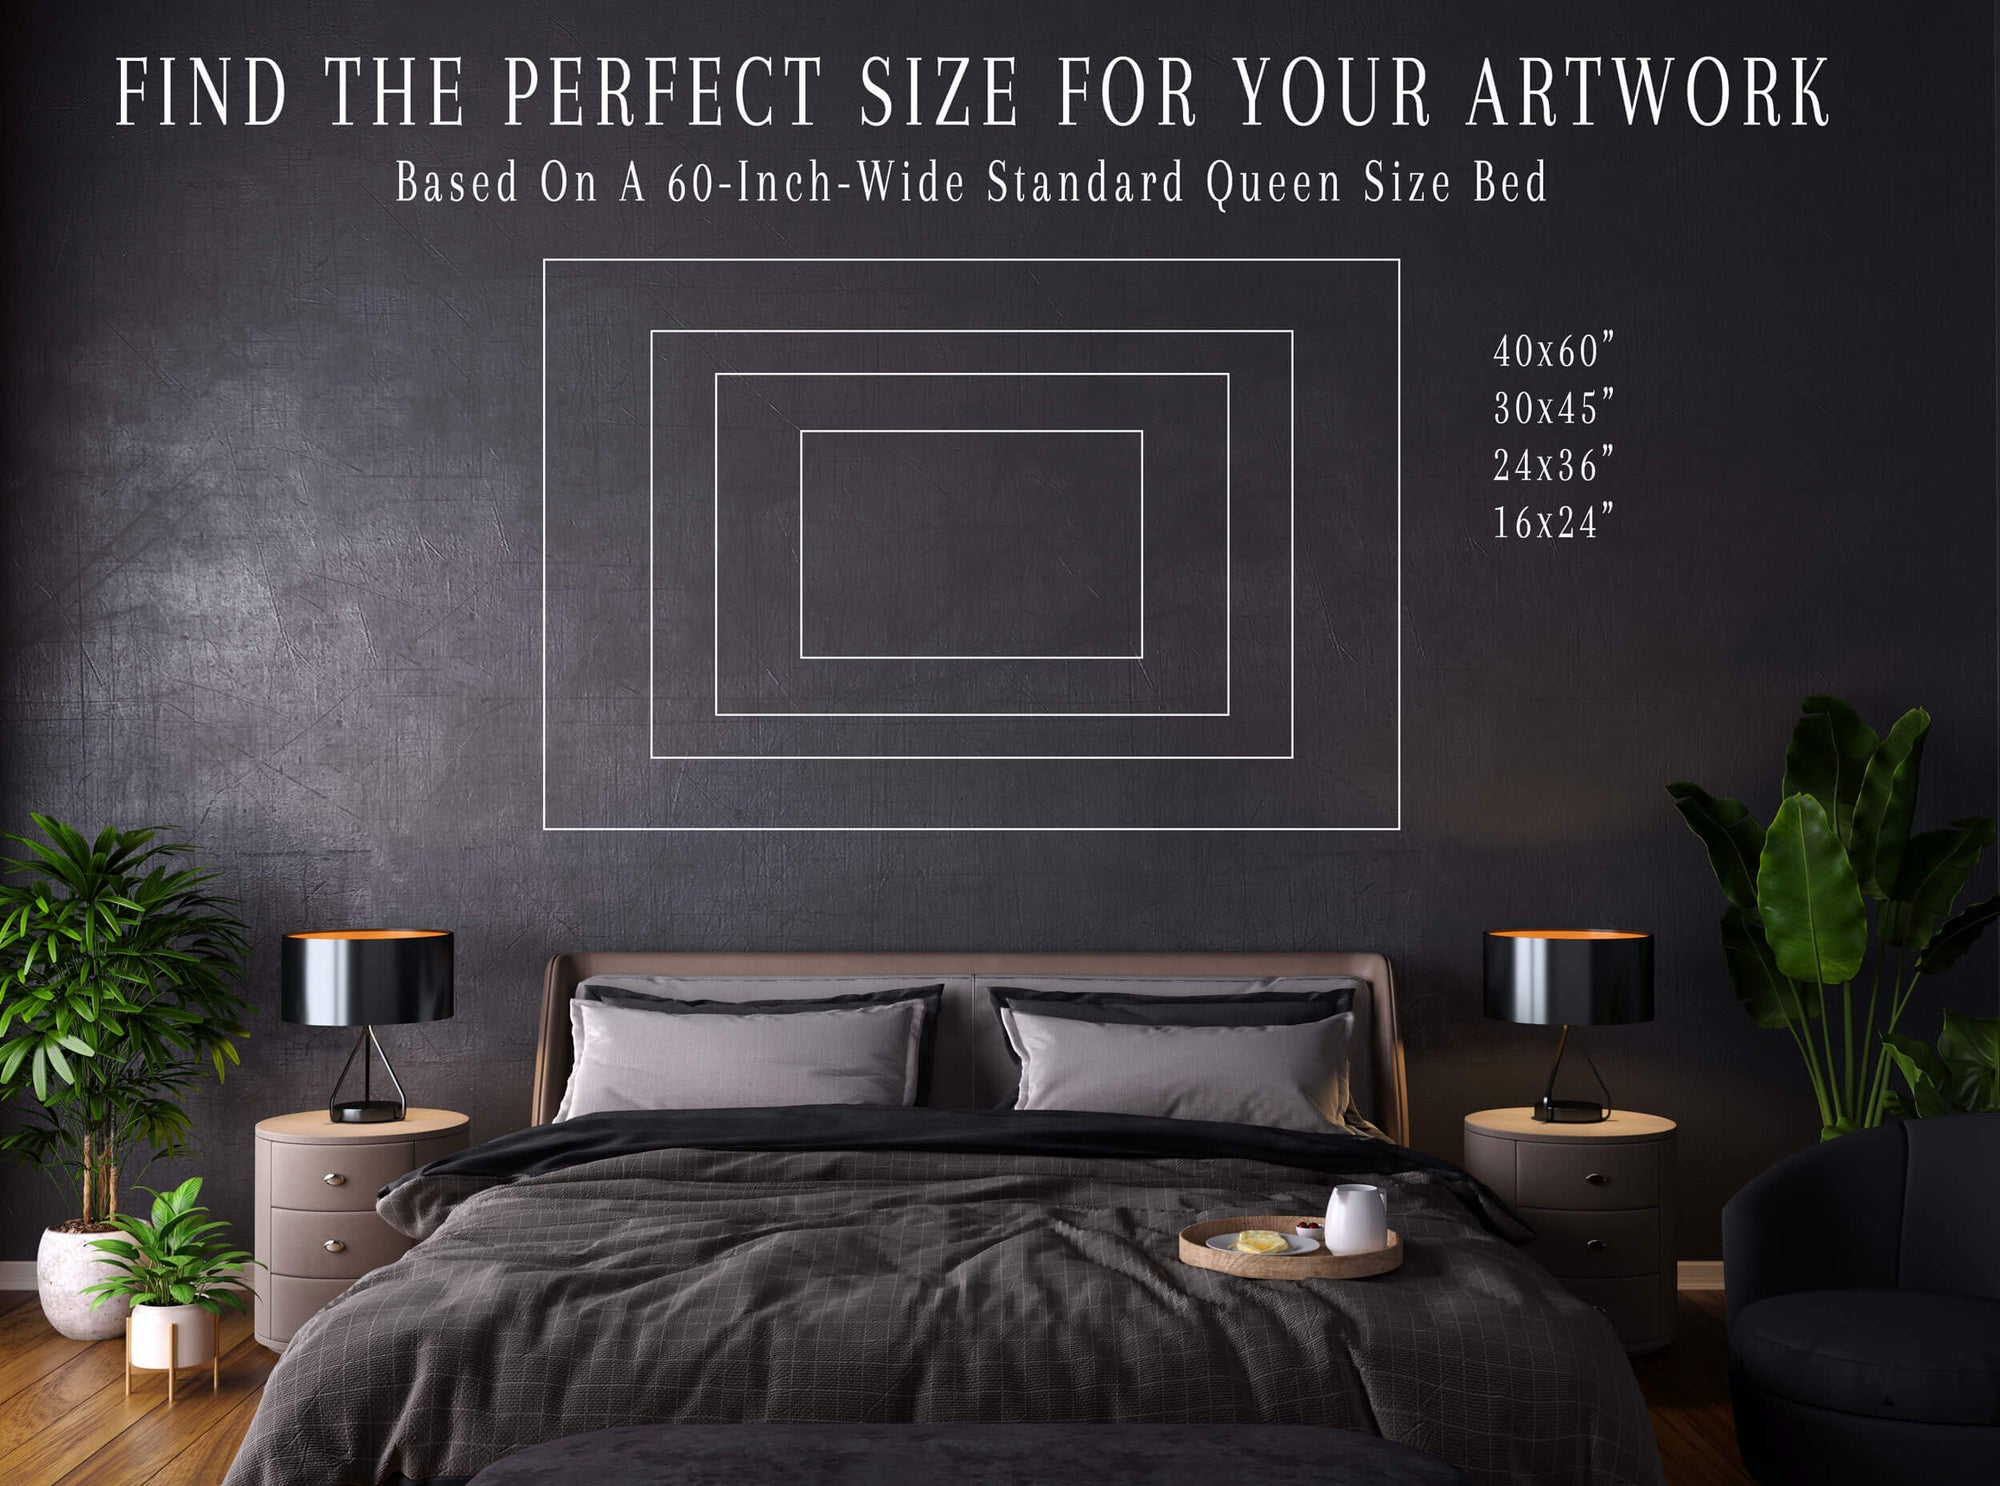 Use this guide to find the perfect size artwork.